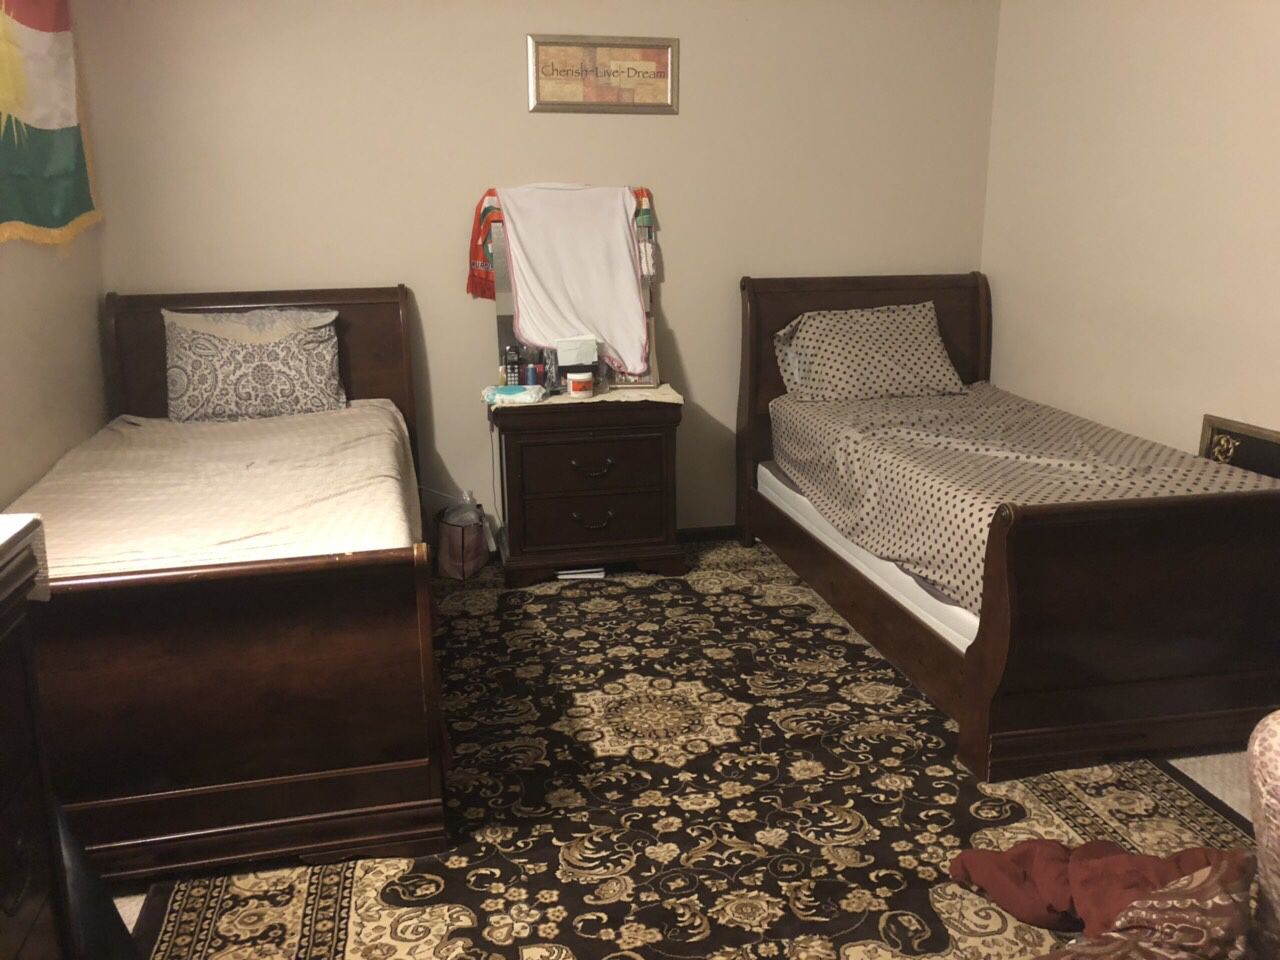 2 twin bed frames 450 OBO